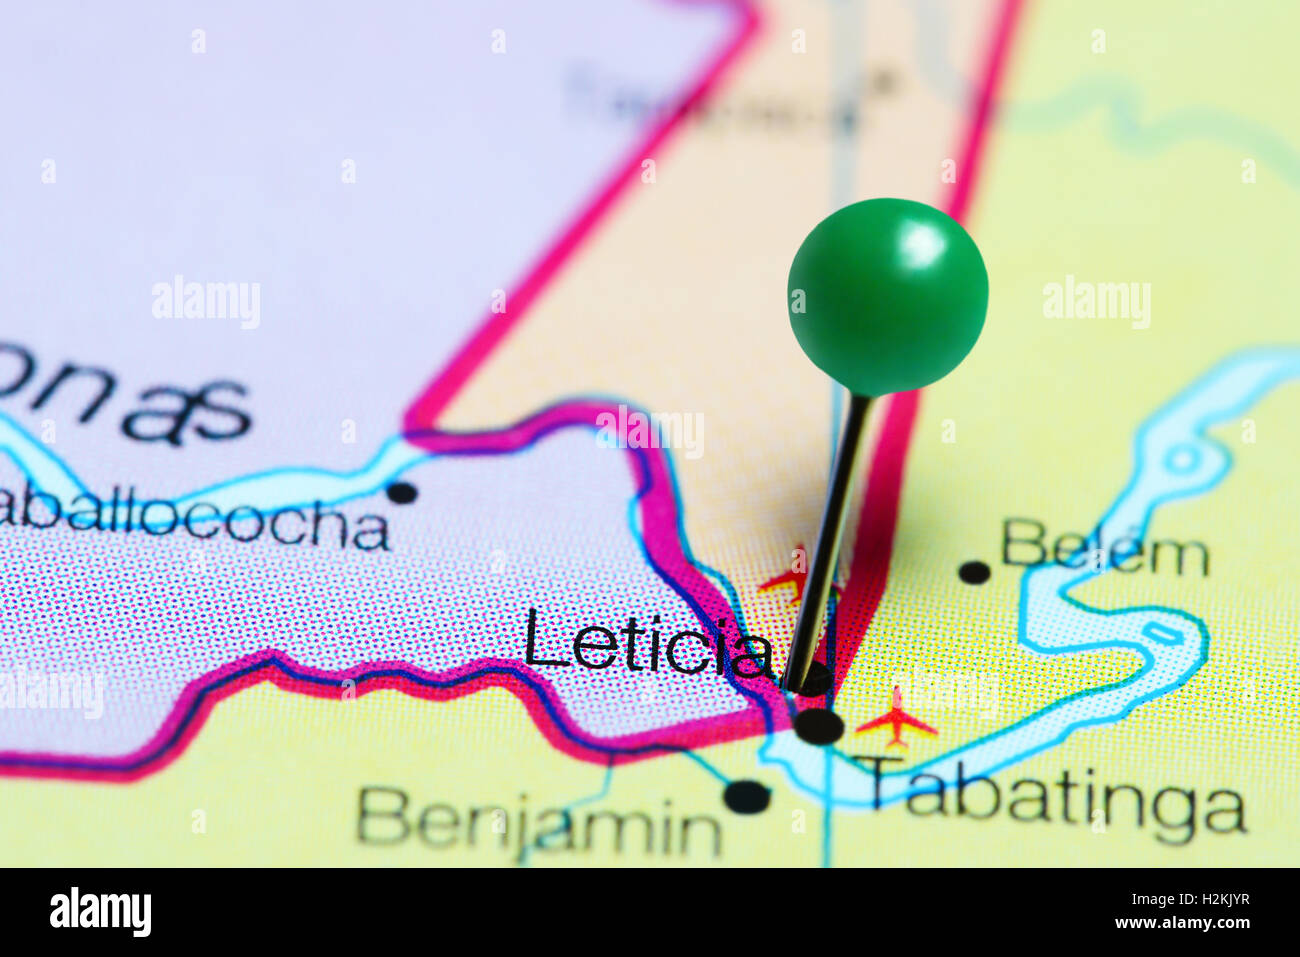 Leticia pinned on a map of Colombia Stock Photo